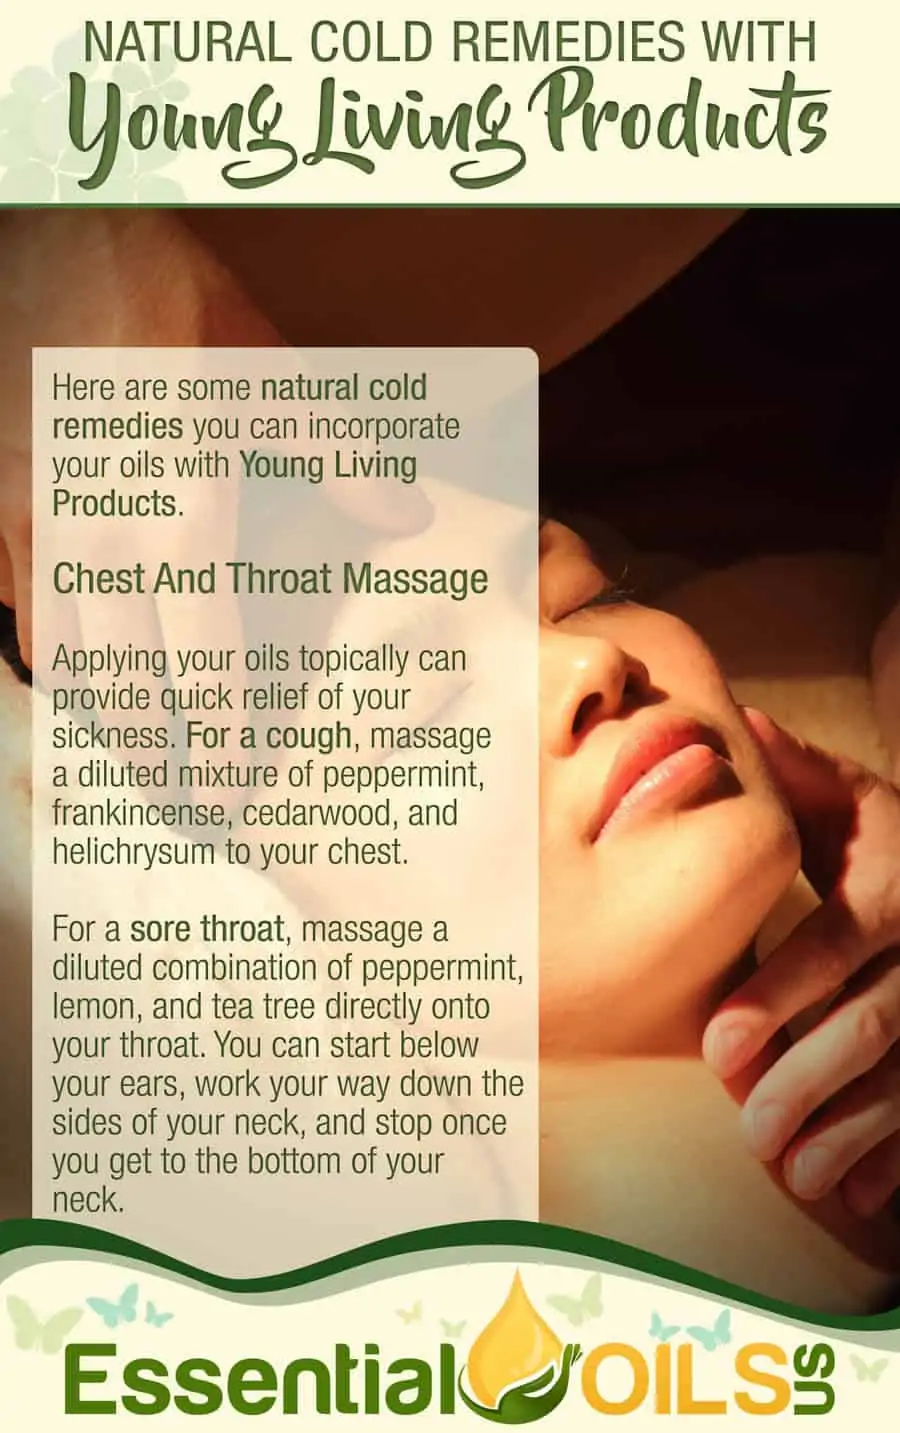 Natural Cold Remedies With Young Living - Chest & Throat Massage